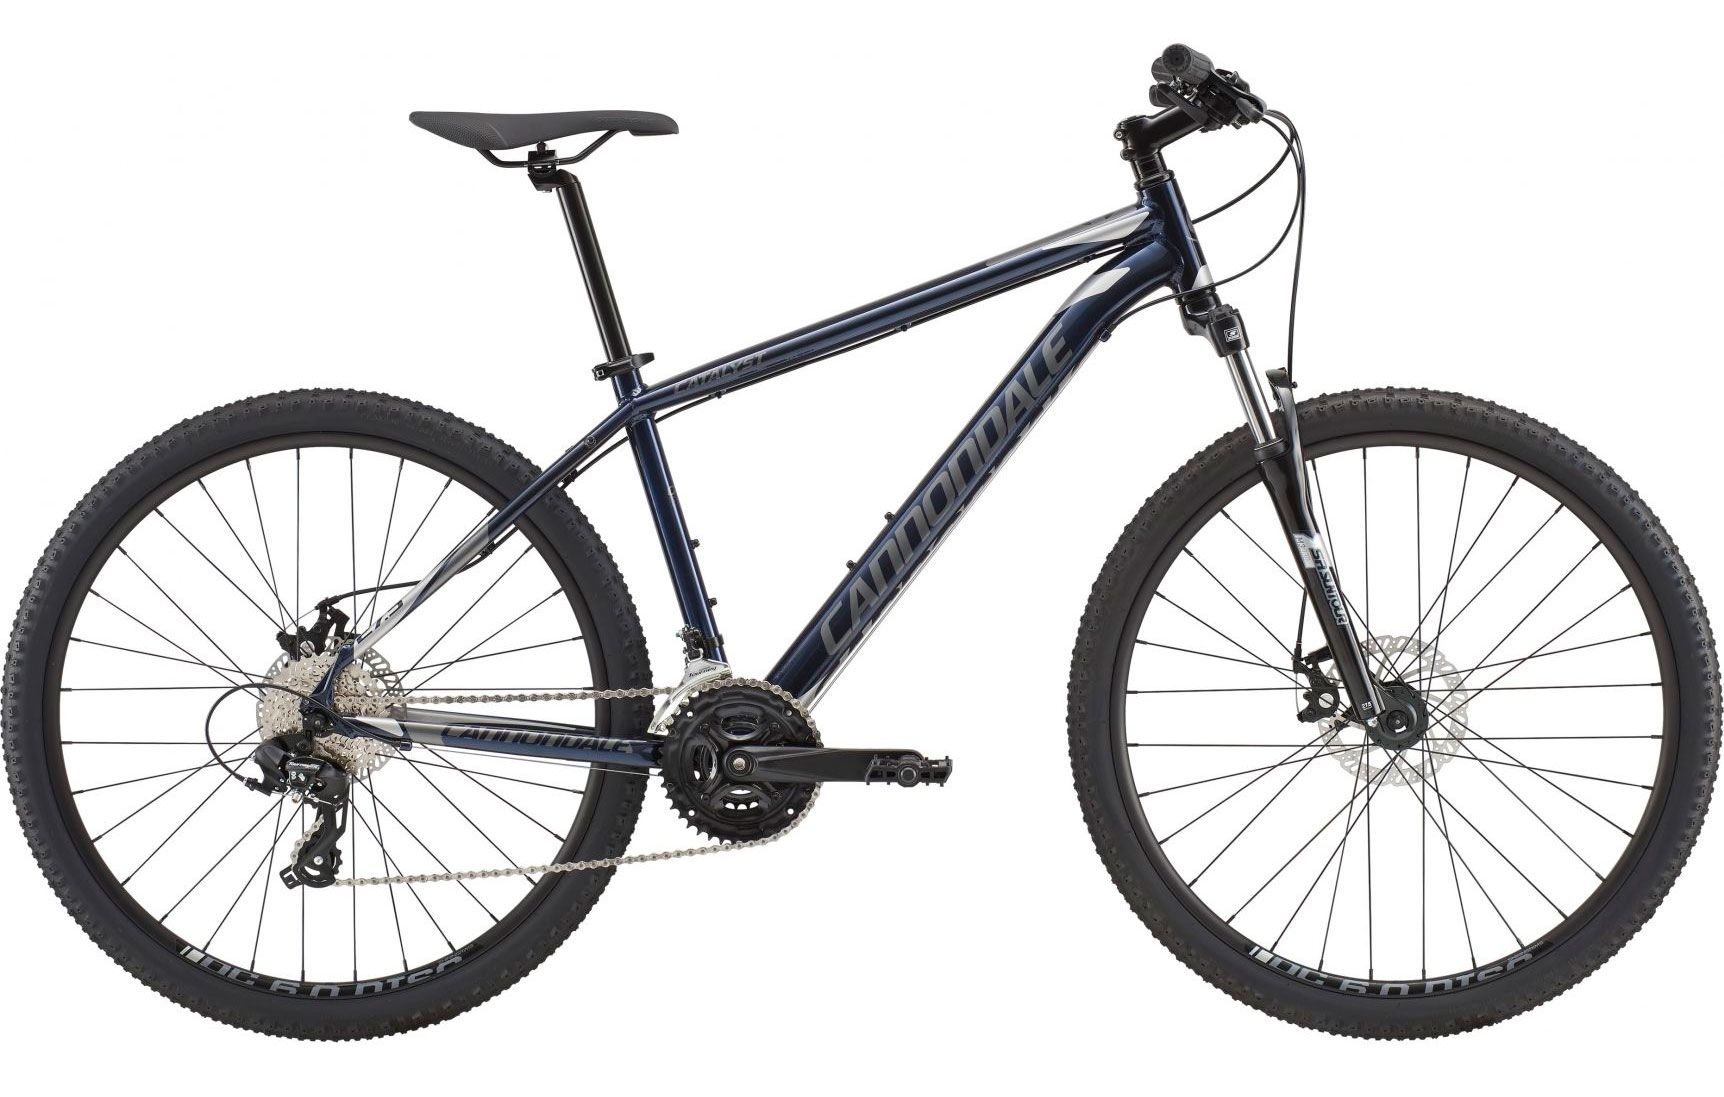 Велосипед 27,5" Cannondale CATALYST 3 рама - M 2018 MDN фото 1